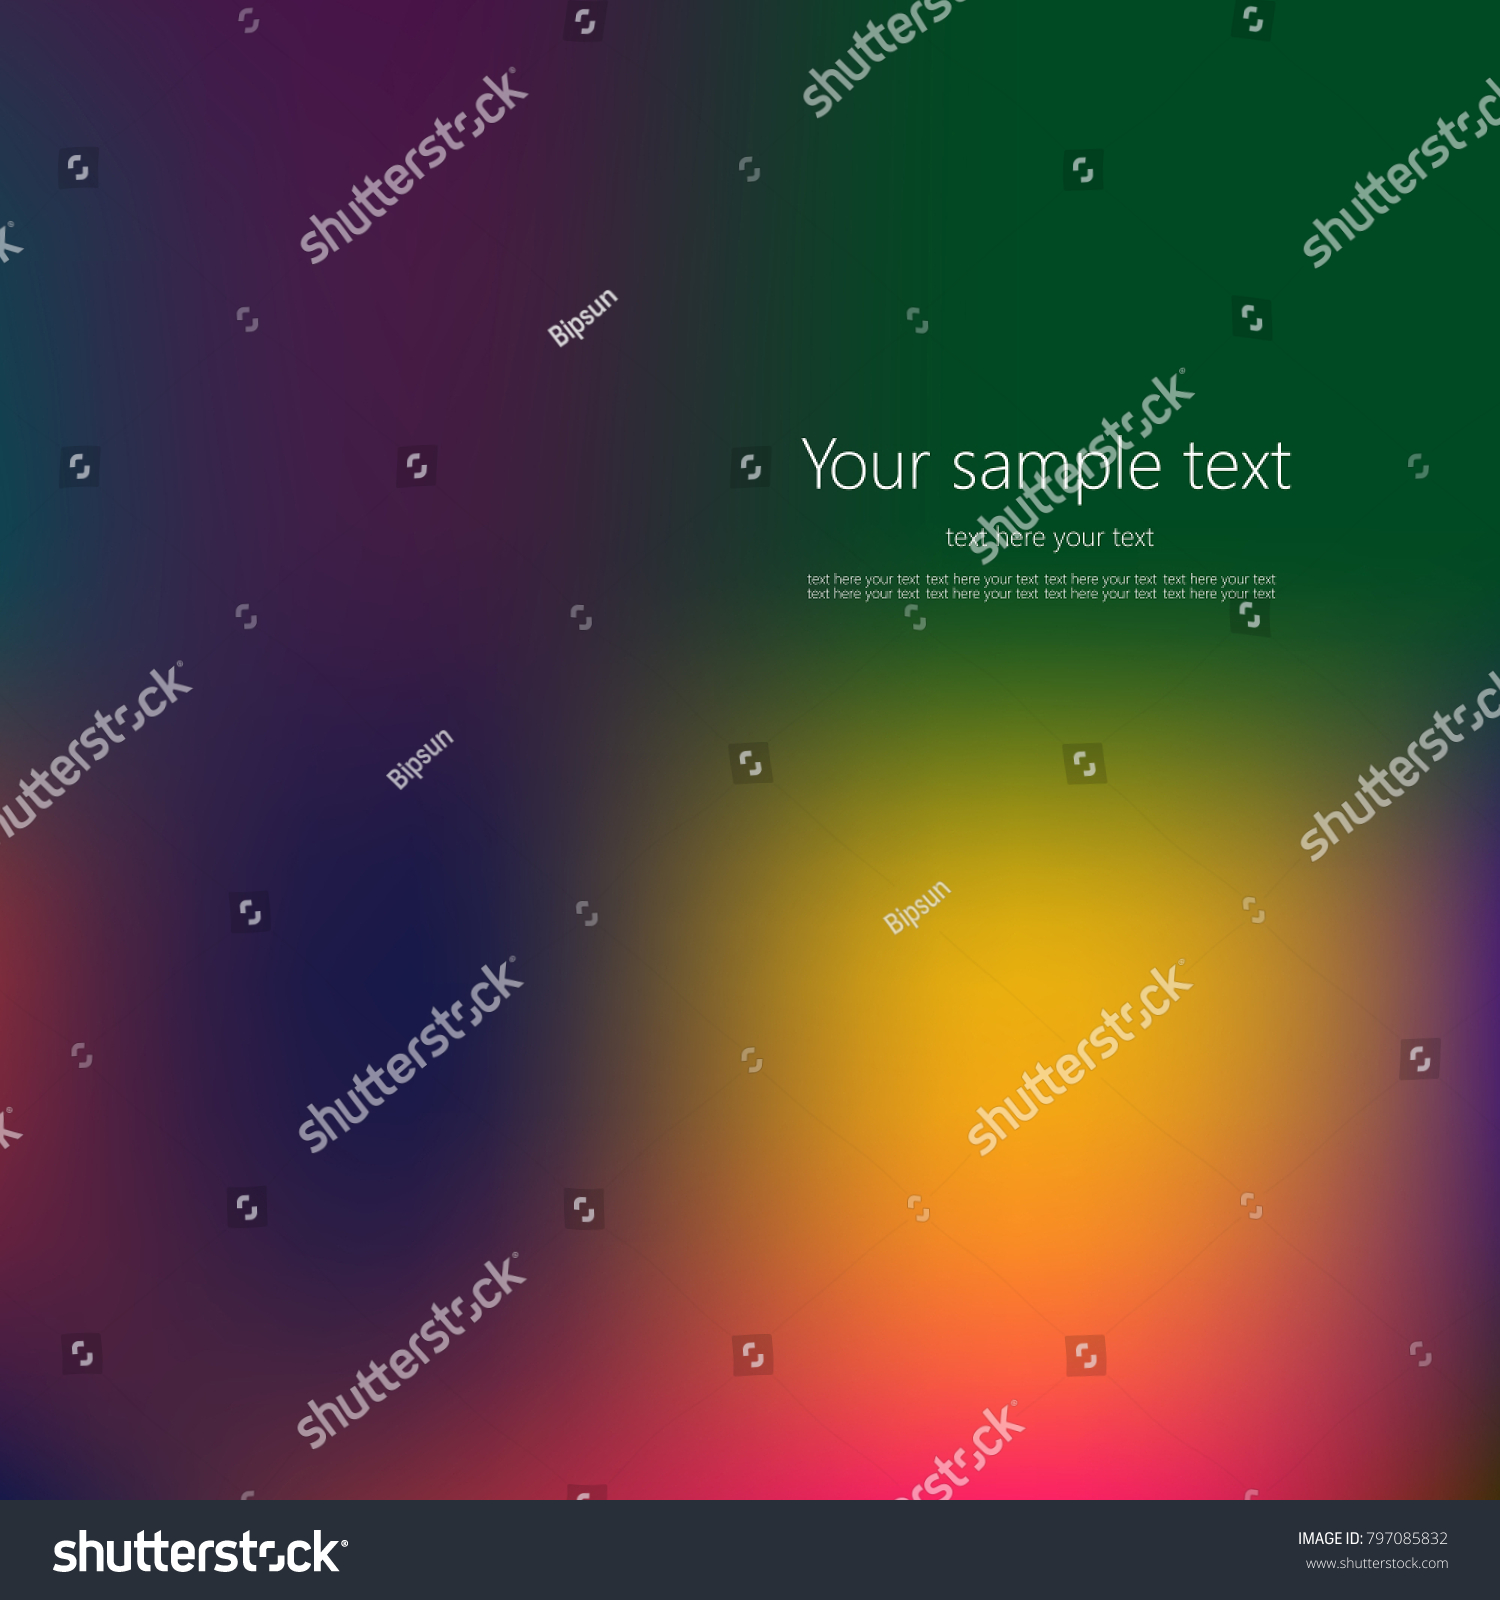 Abstract colorful background with place for your text. #797085832